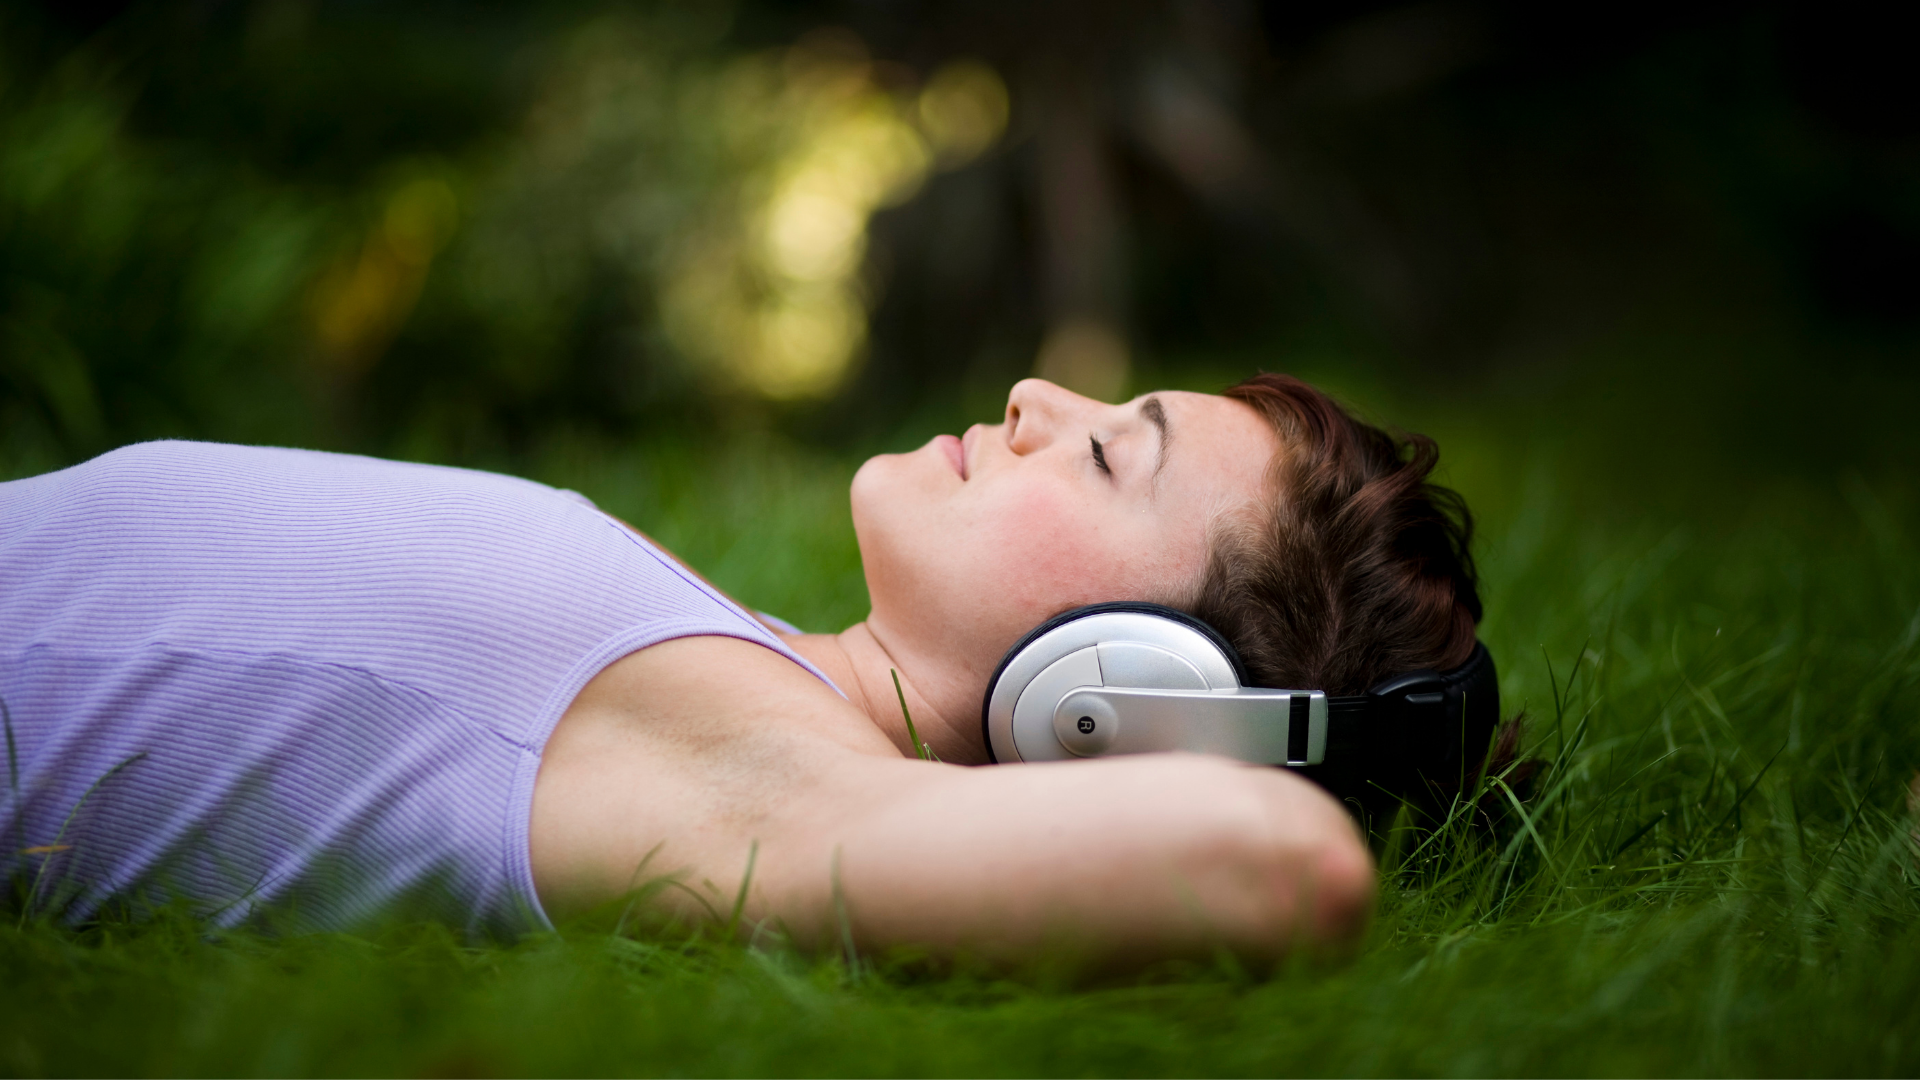 woman lying on grass with hands behind head wearing headphones